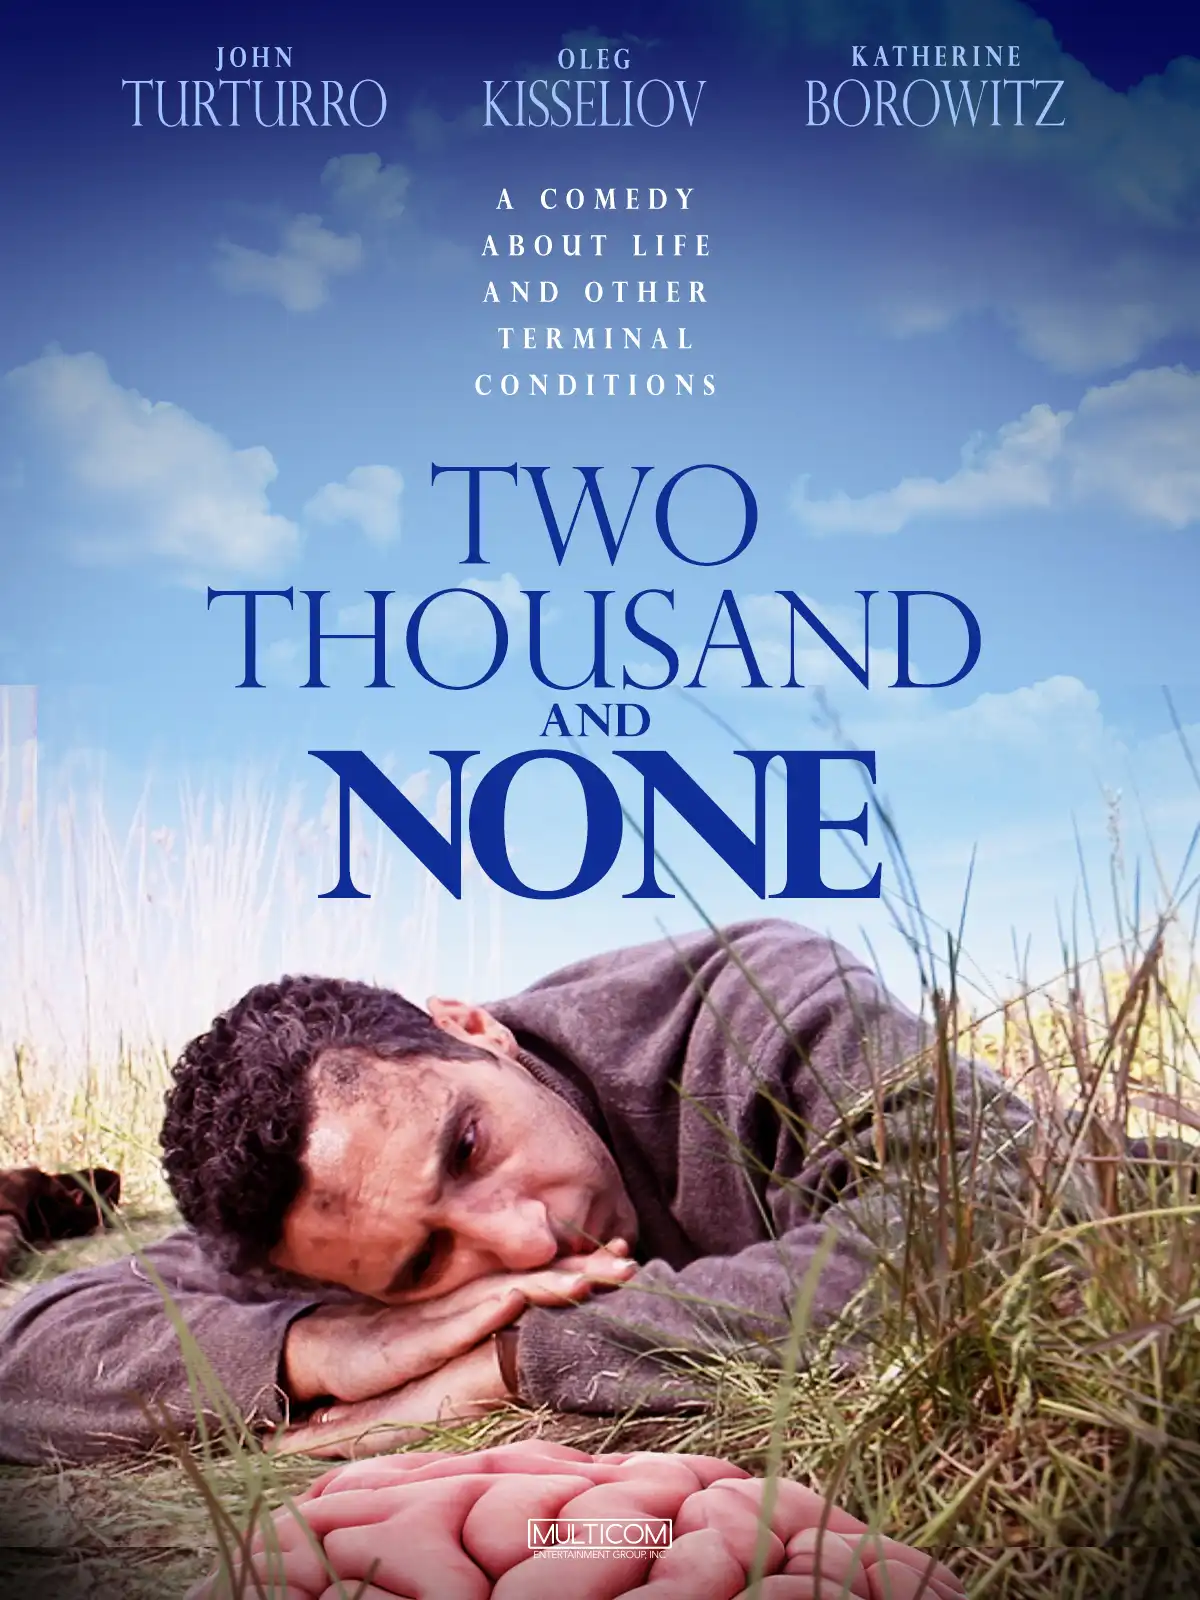 Watch and Download Two Thousand and None 2